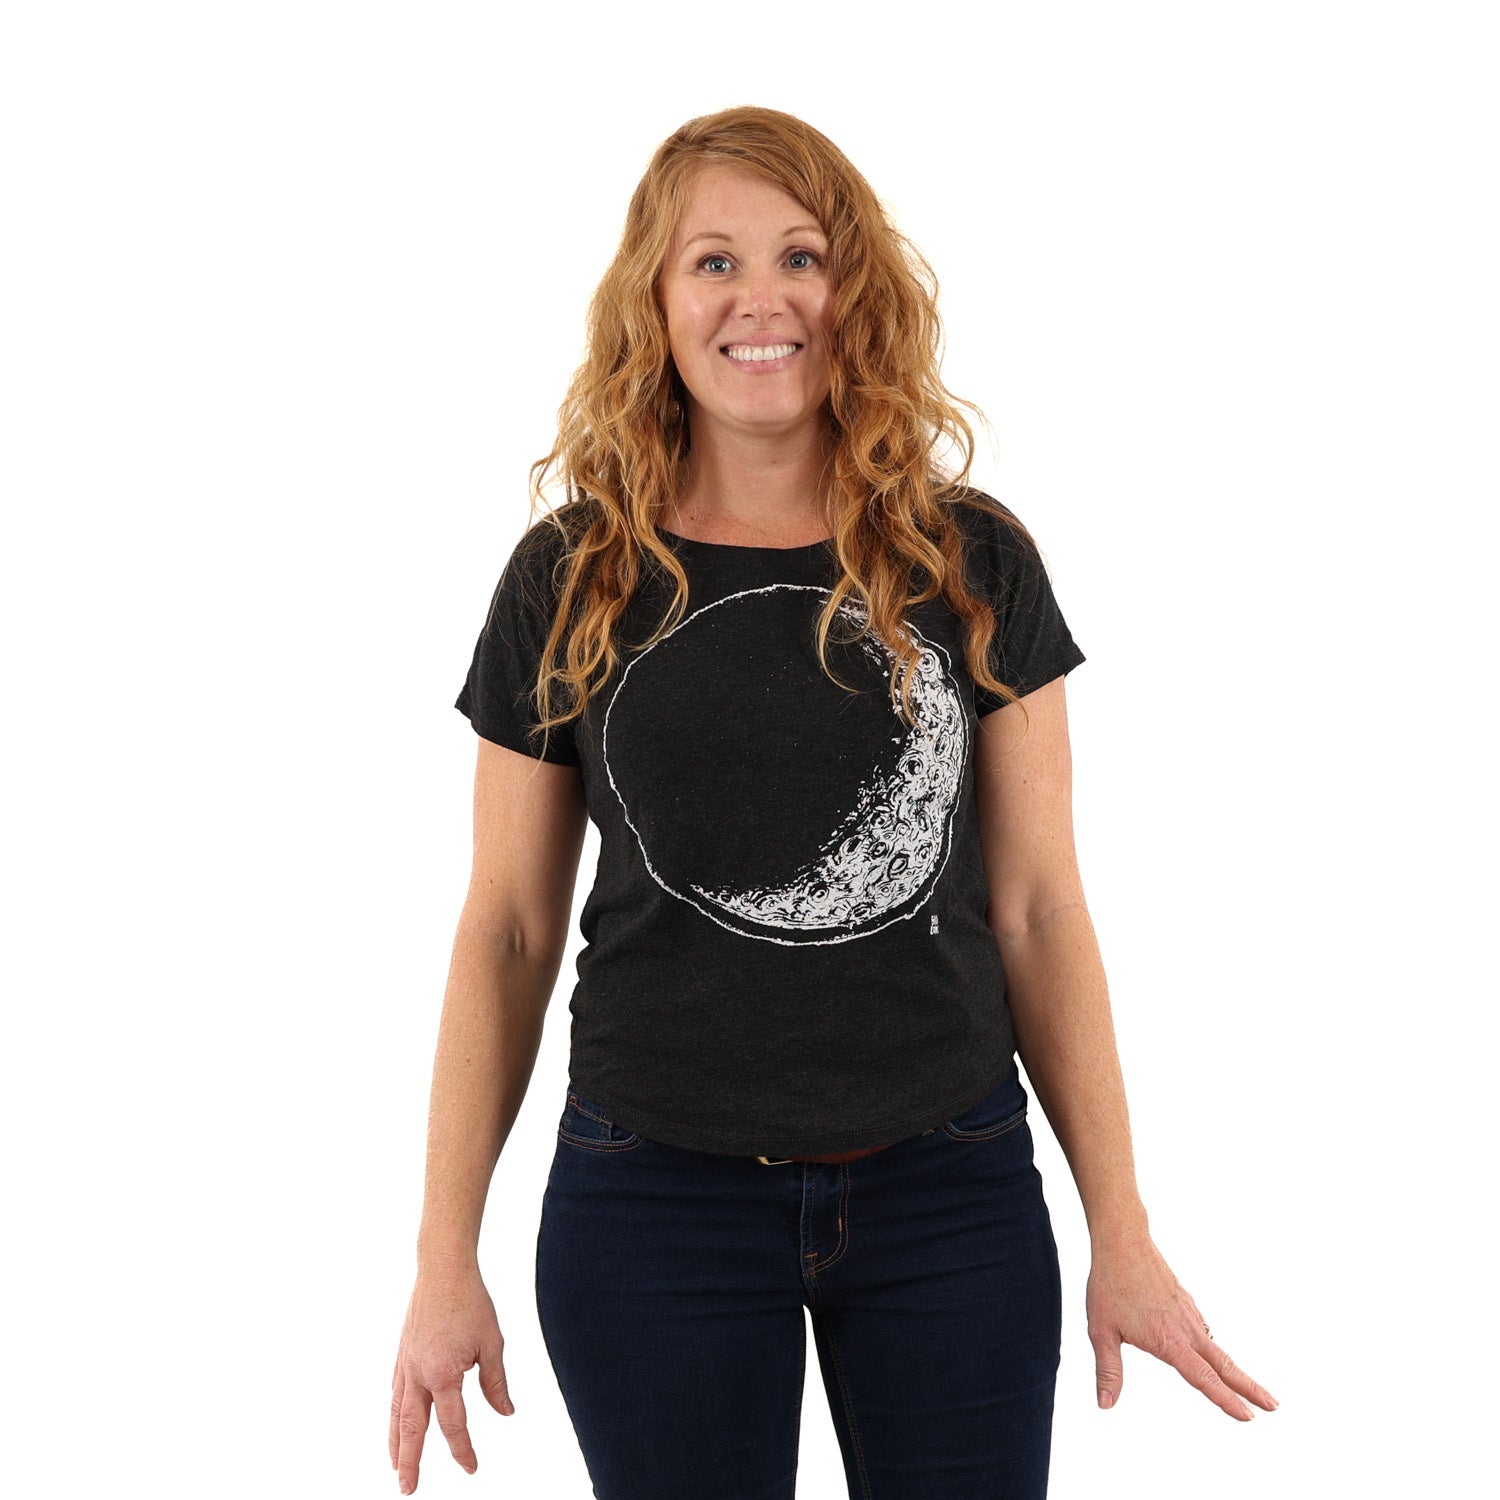 Woman wearing a black t shirt with crescent moon printed in white ink